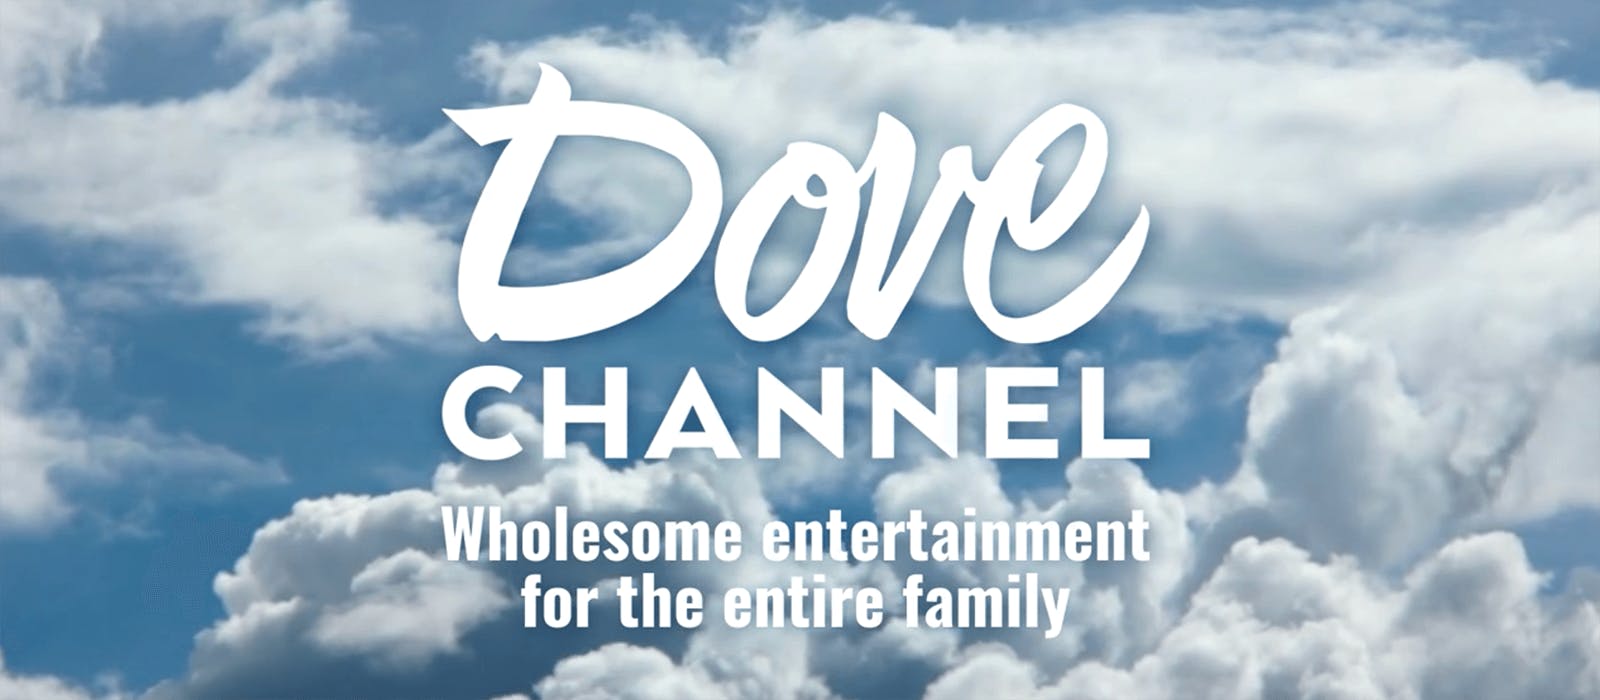 watch dove channel free